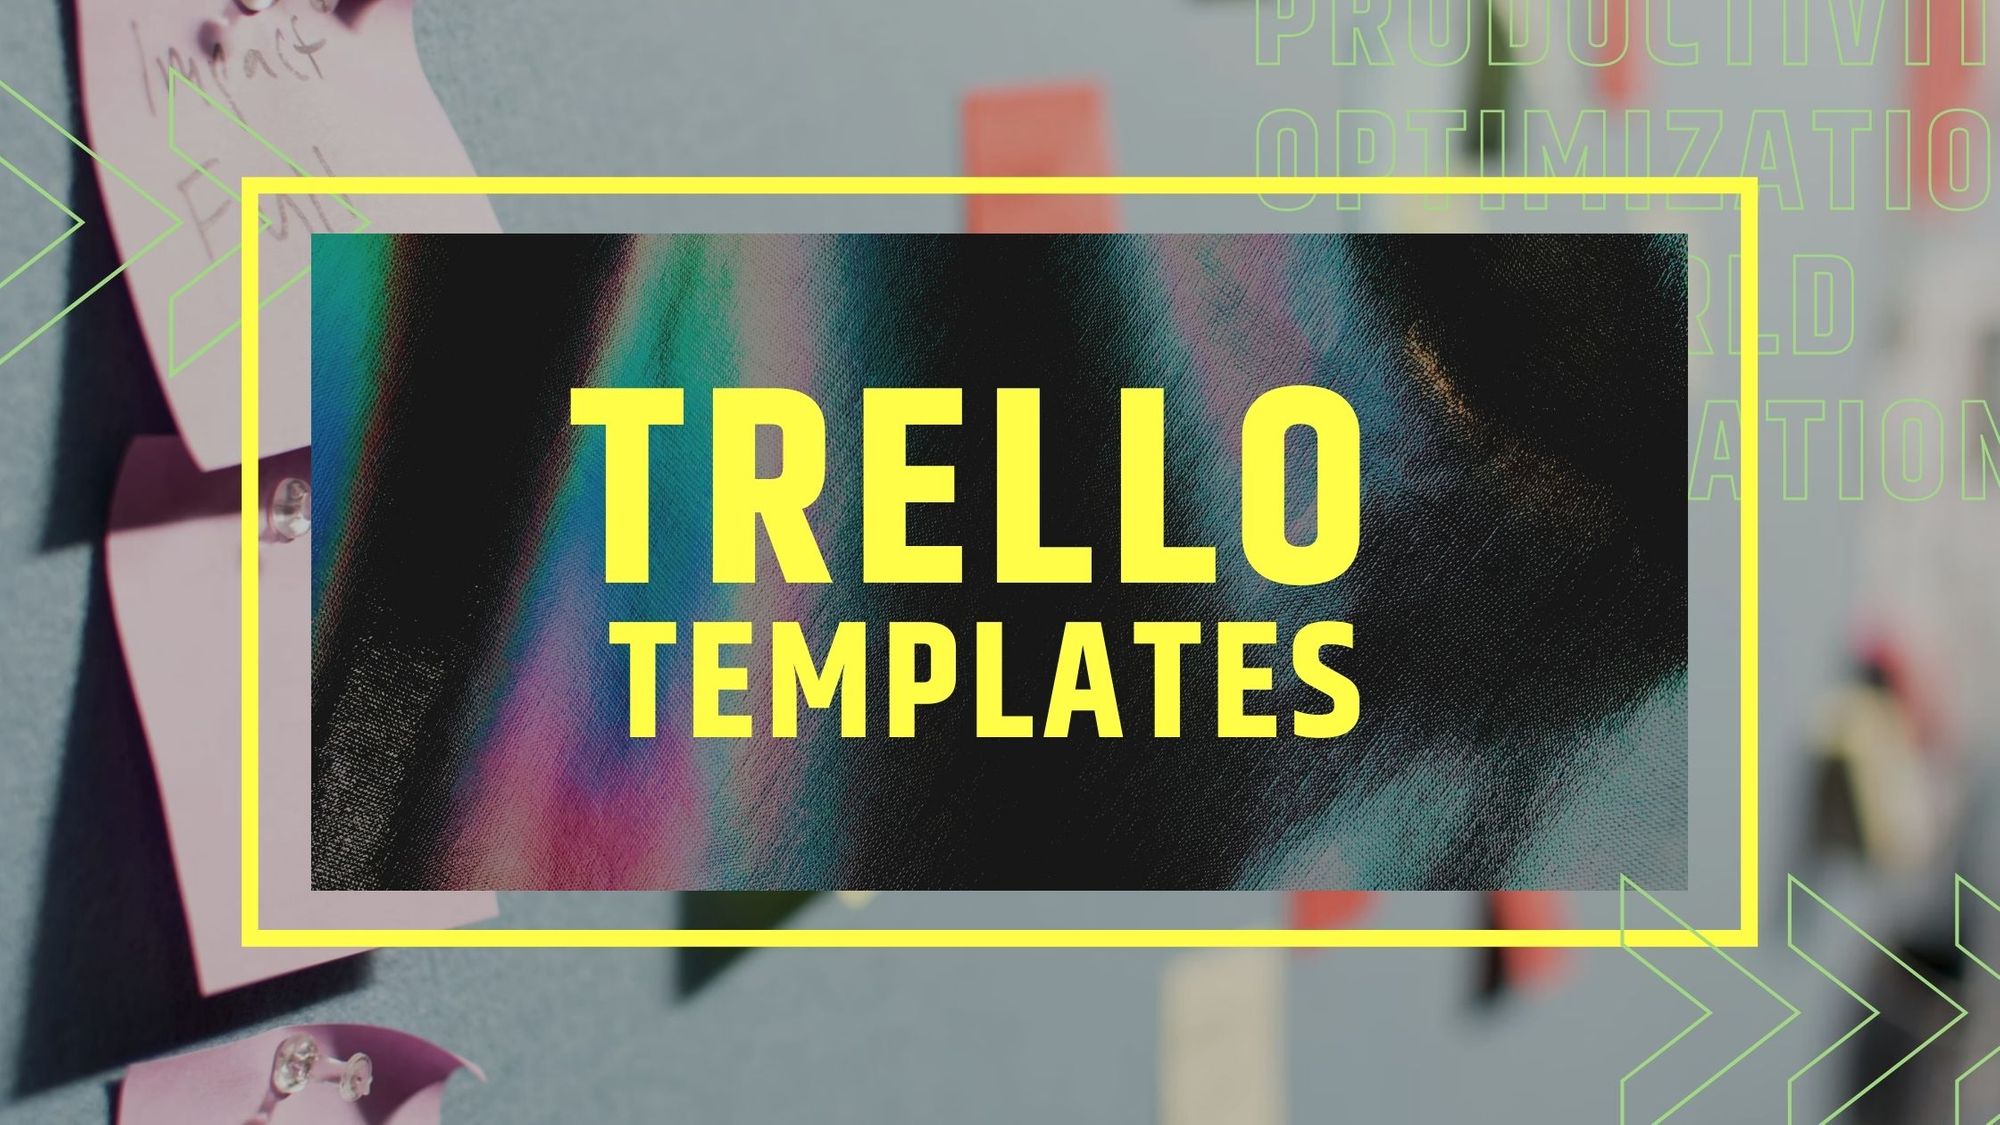 Trending Files tagged as trello boards